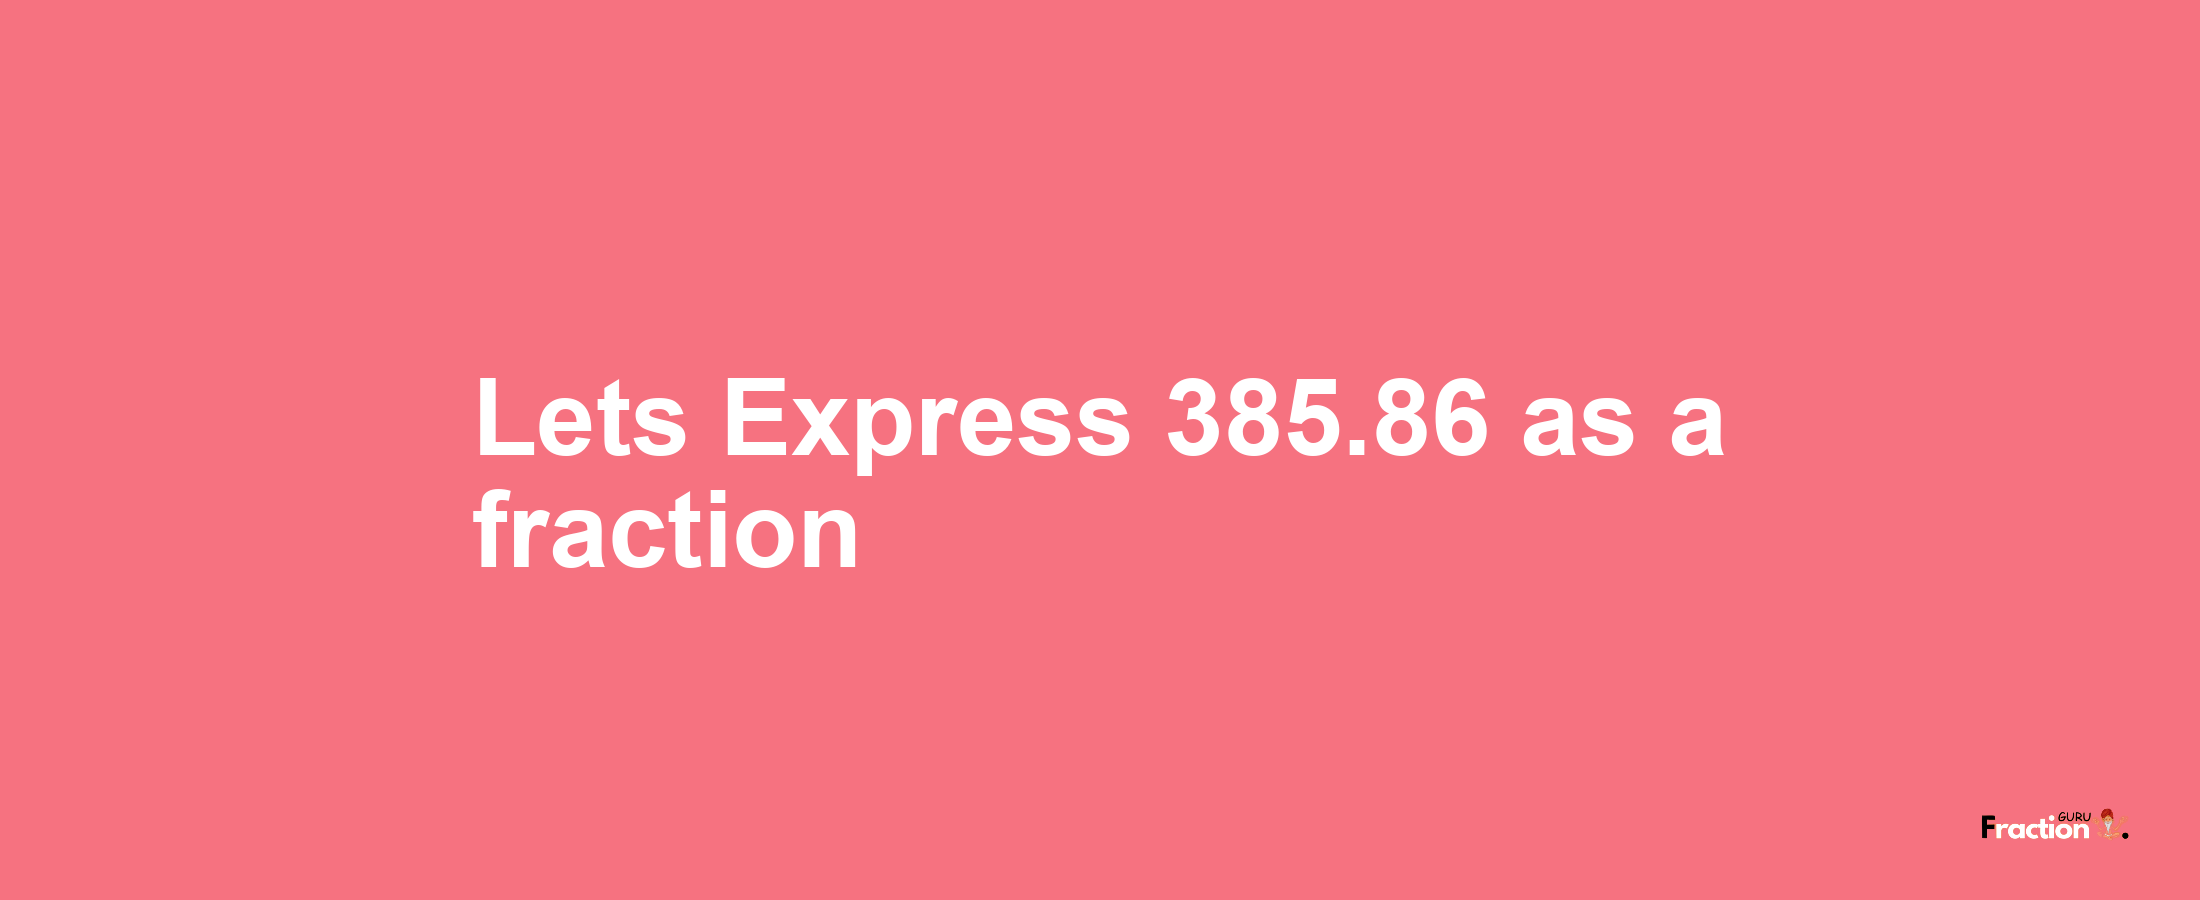 Lets Express 385.86 as afraction